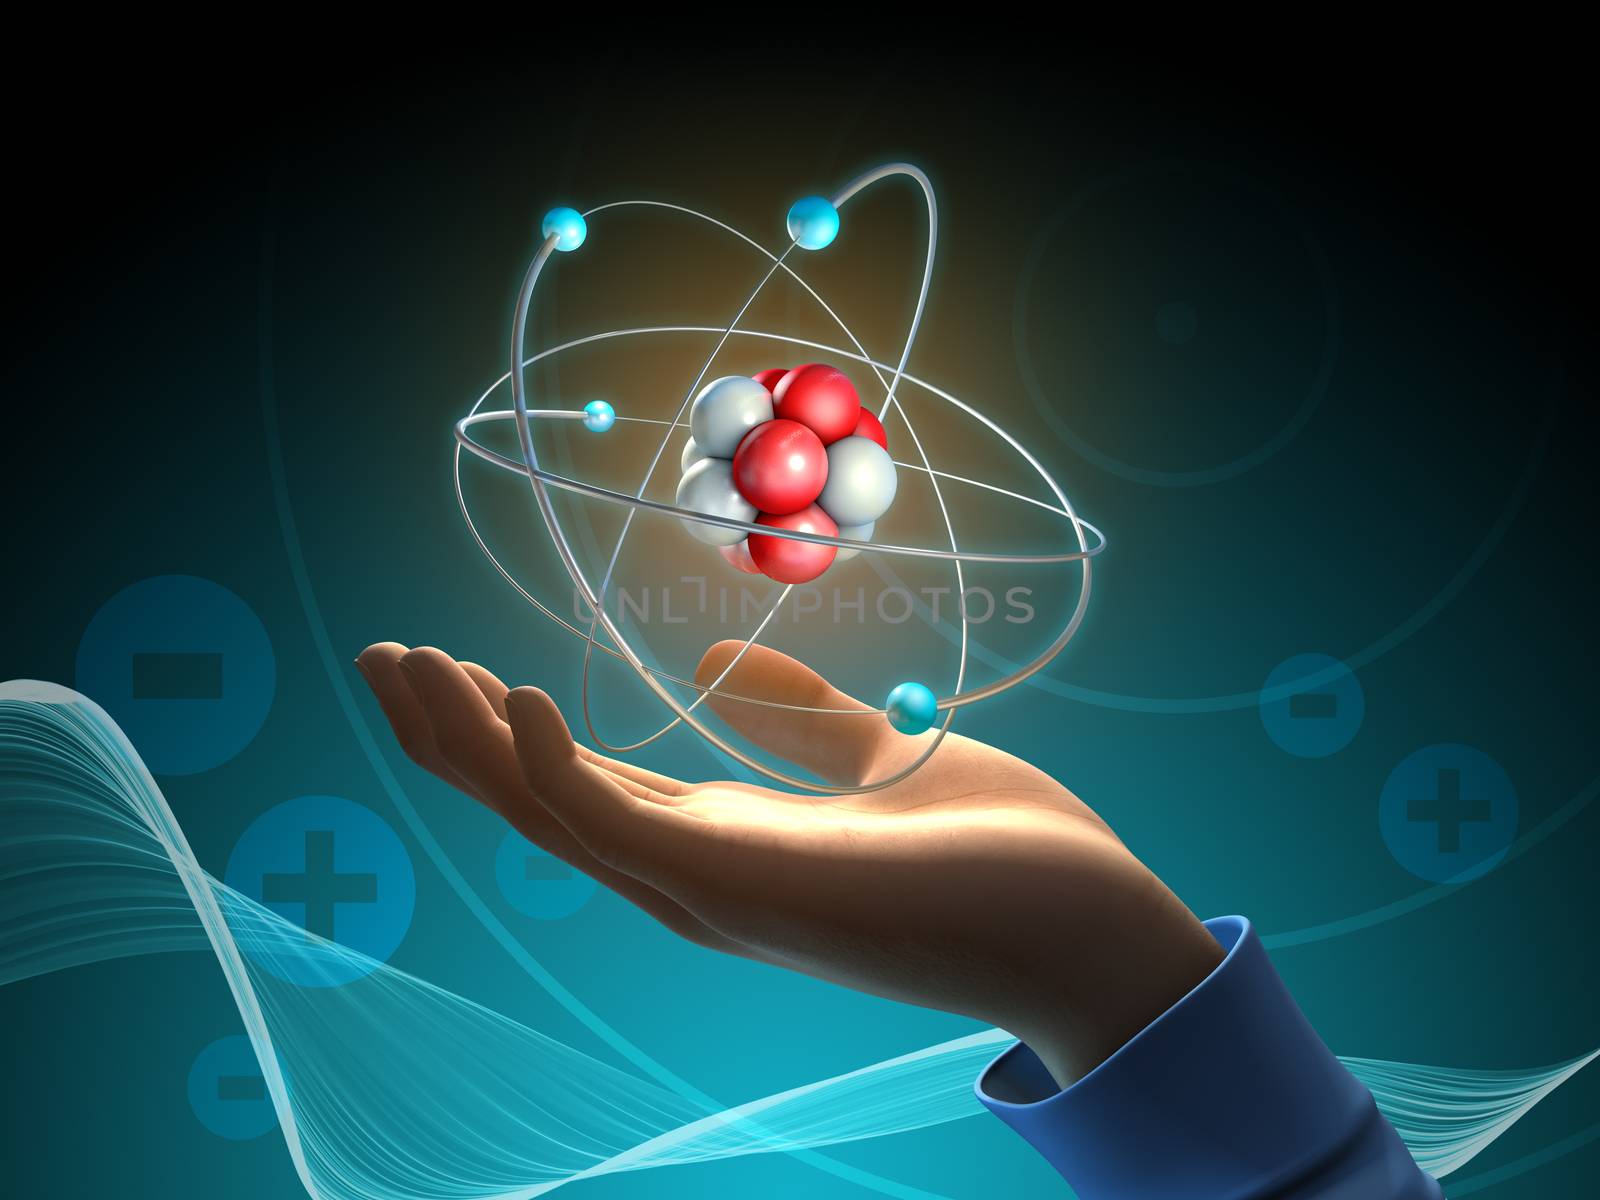 Conceptual image about the atom as a source of energy. 3D illustration.